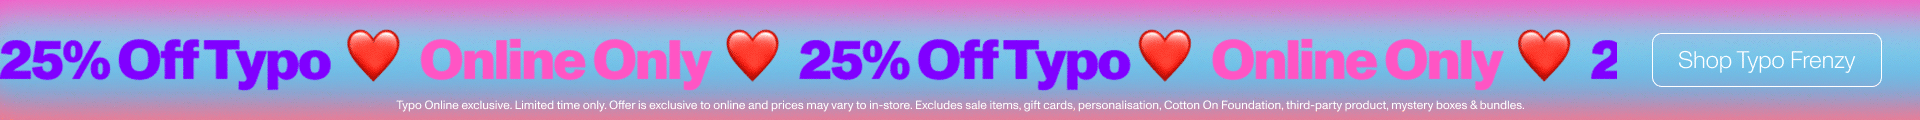 25% off typo. Online only. Shop typo frenzy.